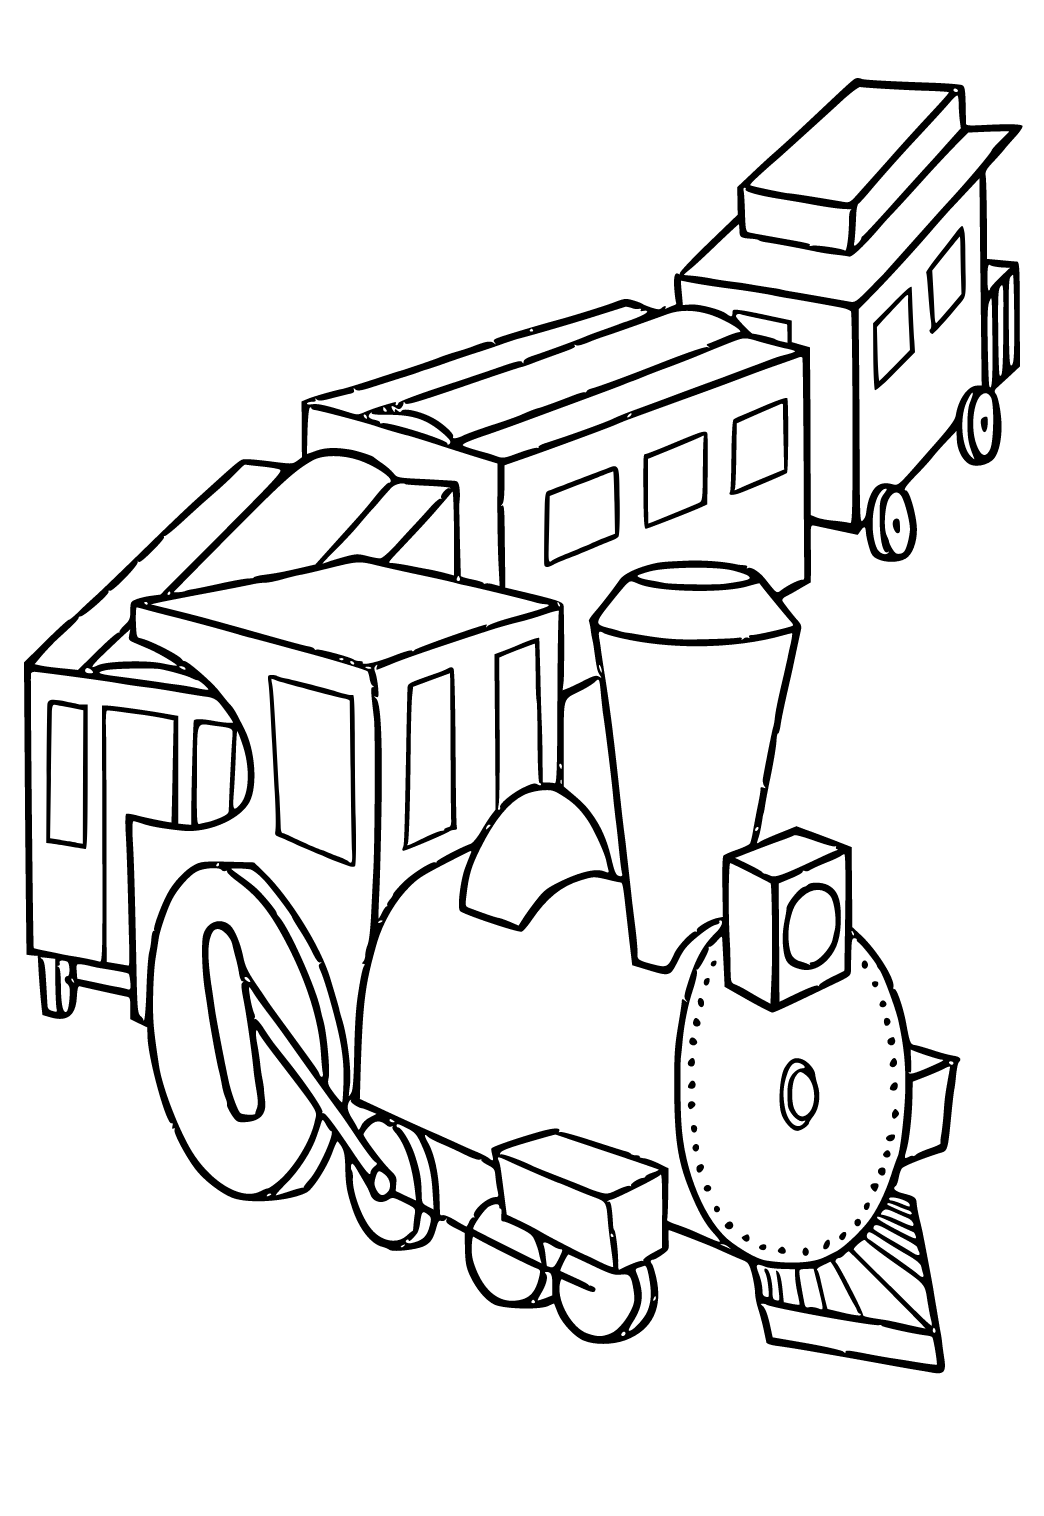 Free printable polar express toy coloring page for adults and kids